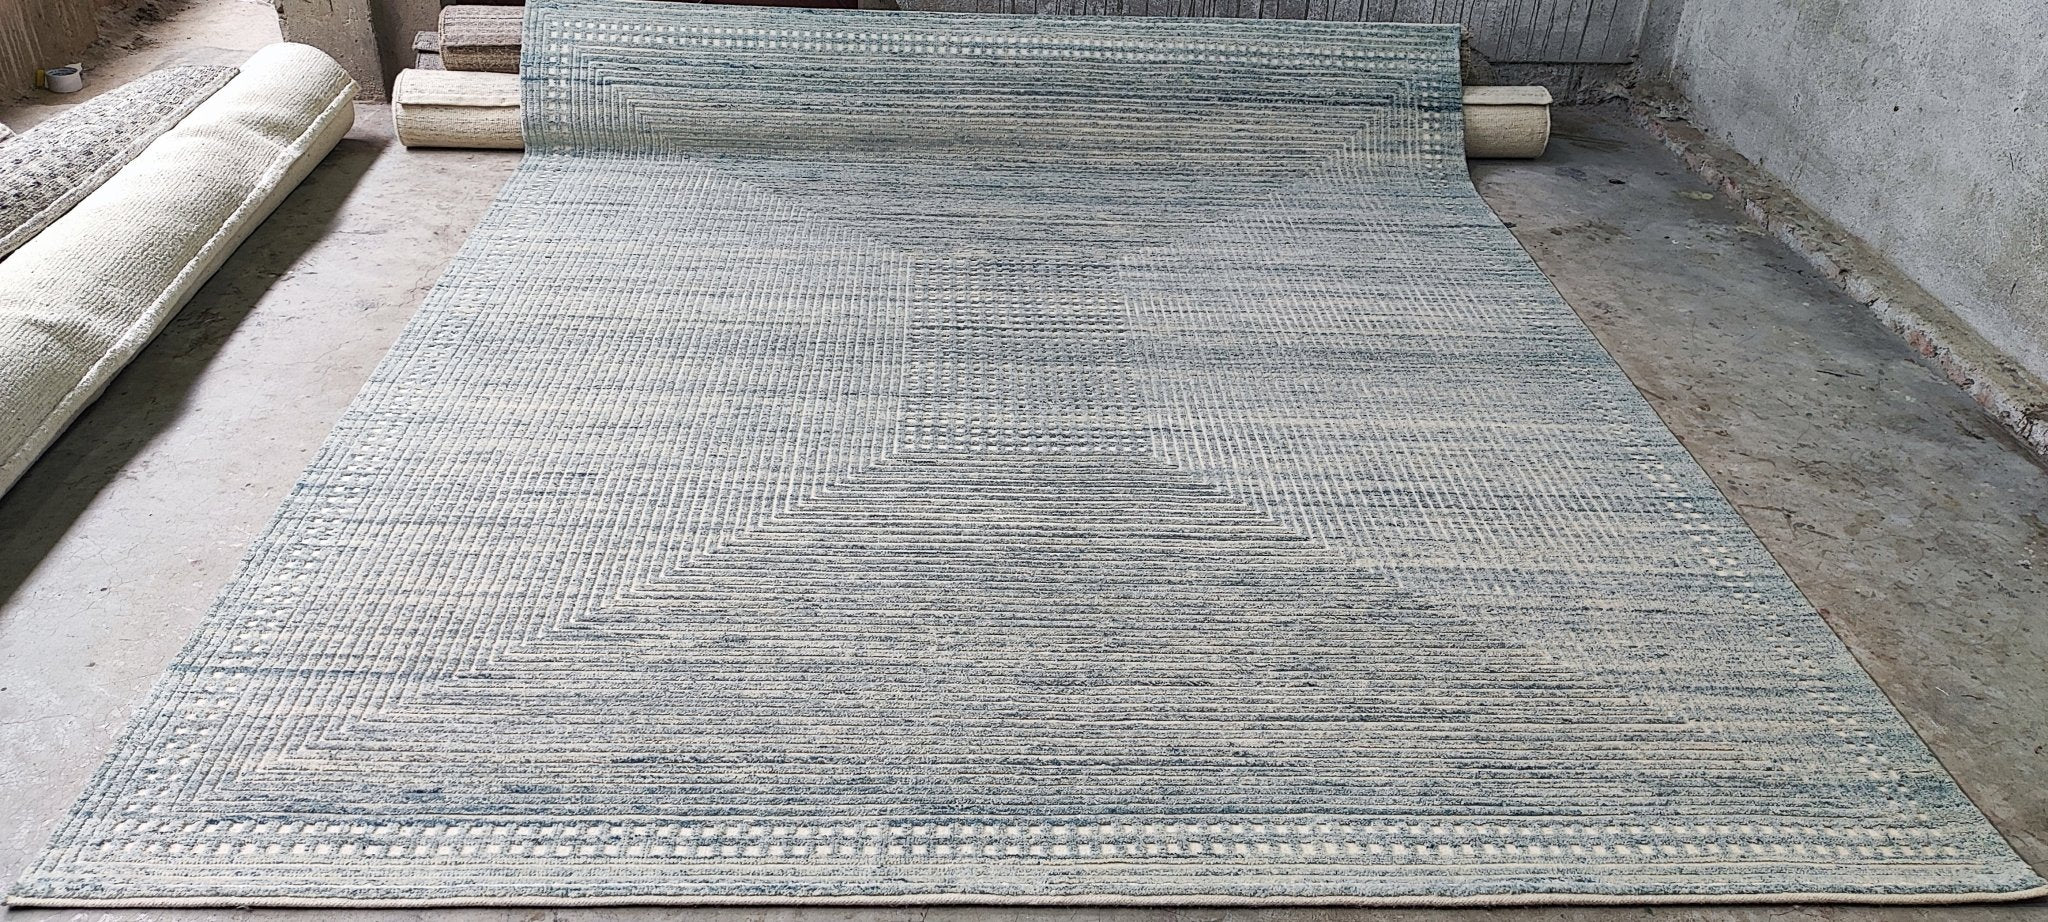 Mick 8.6x10 Hand-Knotted Aqua Blue Cut Pile | Banana Manor Rug Factory Outlet